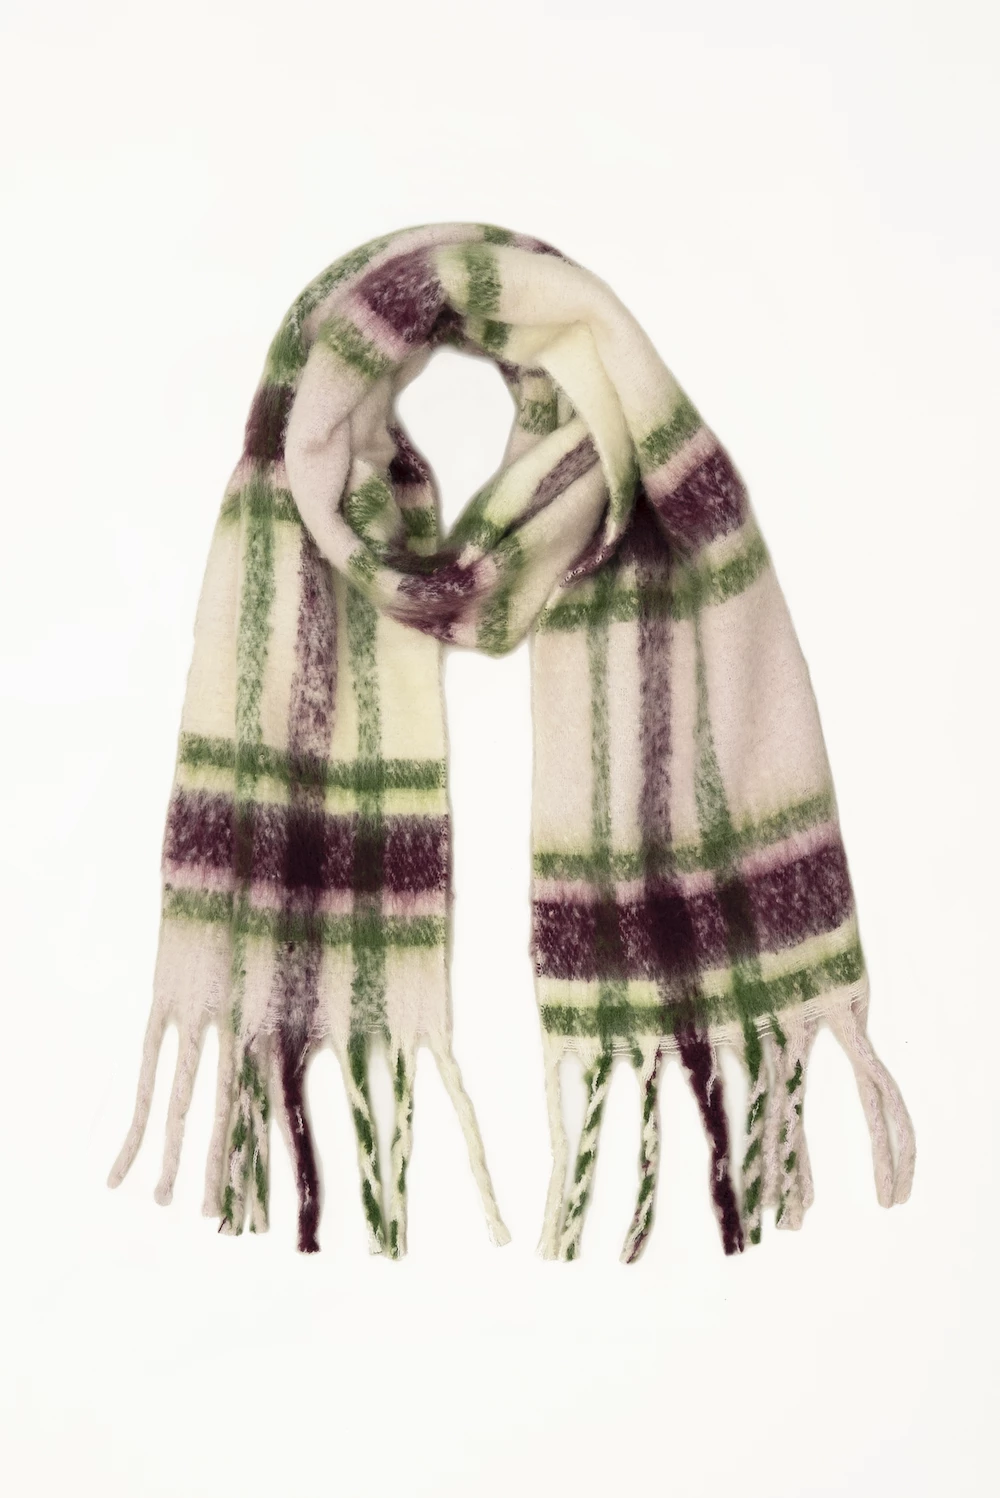 cut out image of oversized green, purple and ivory plaid scarf